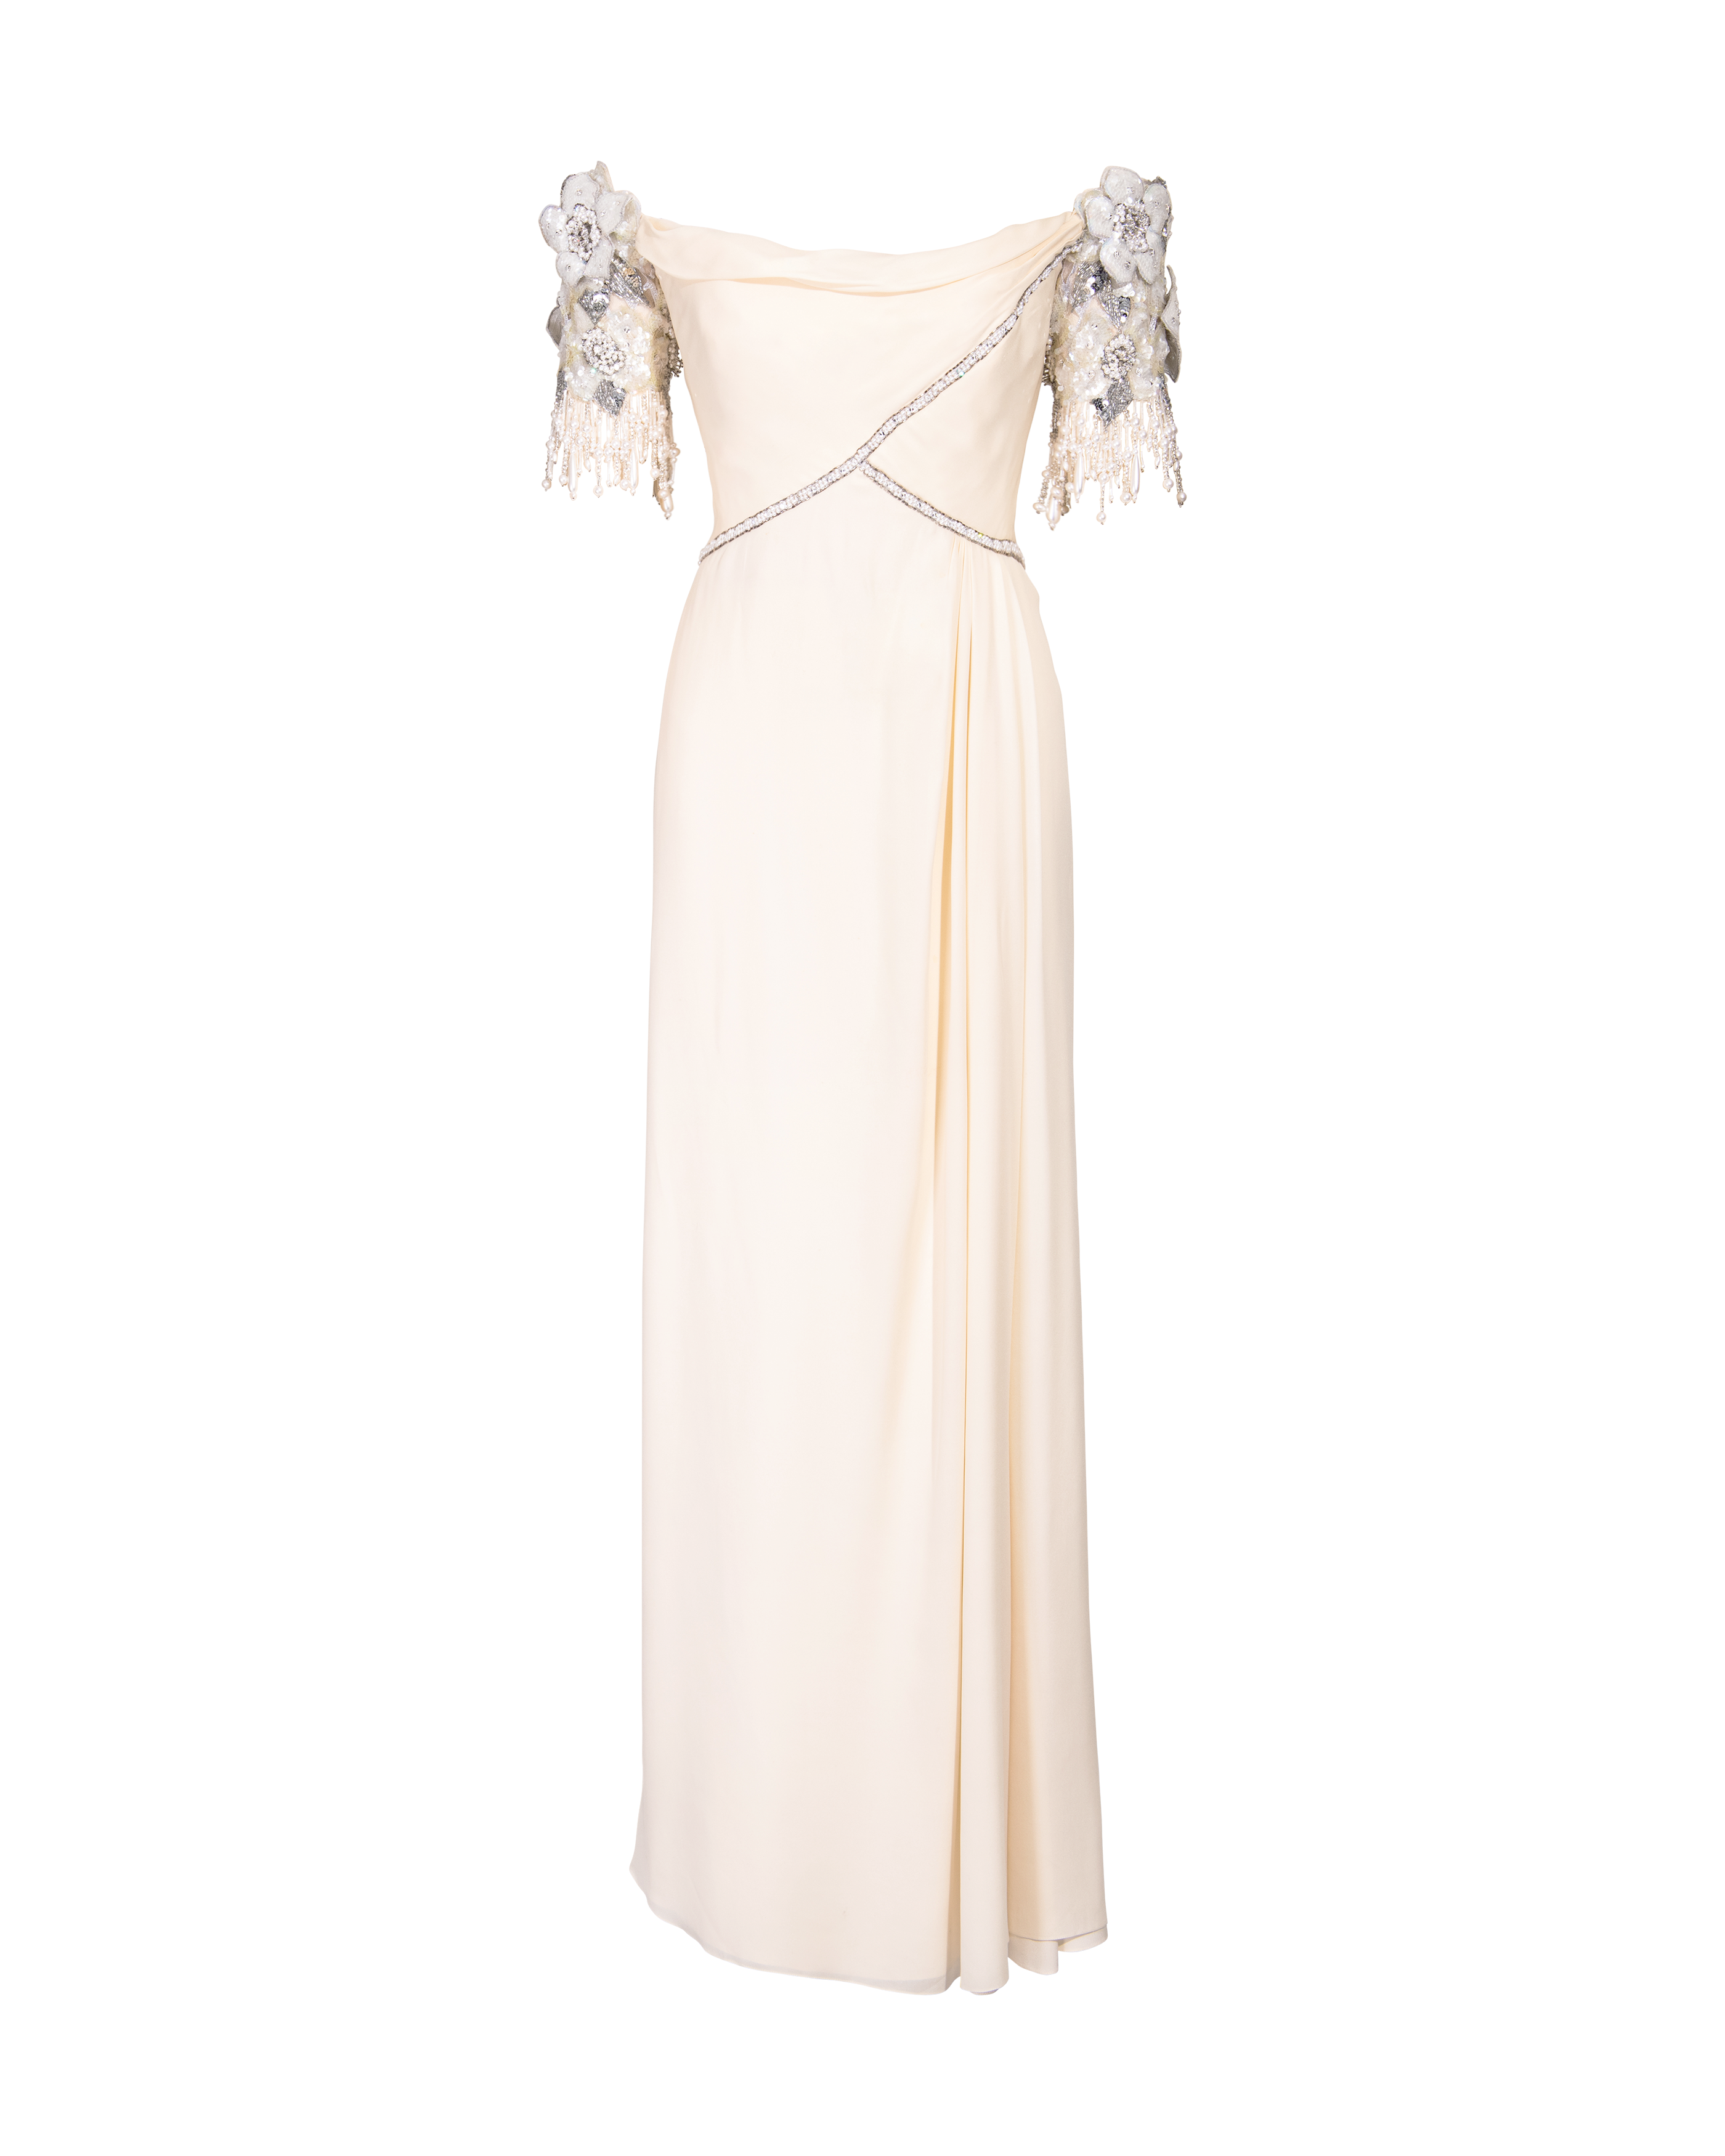 1970's Gown with Embellished Floral Sleeves